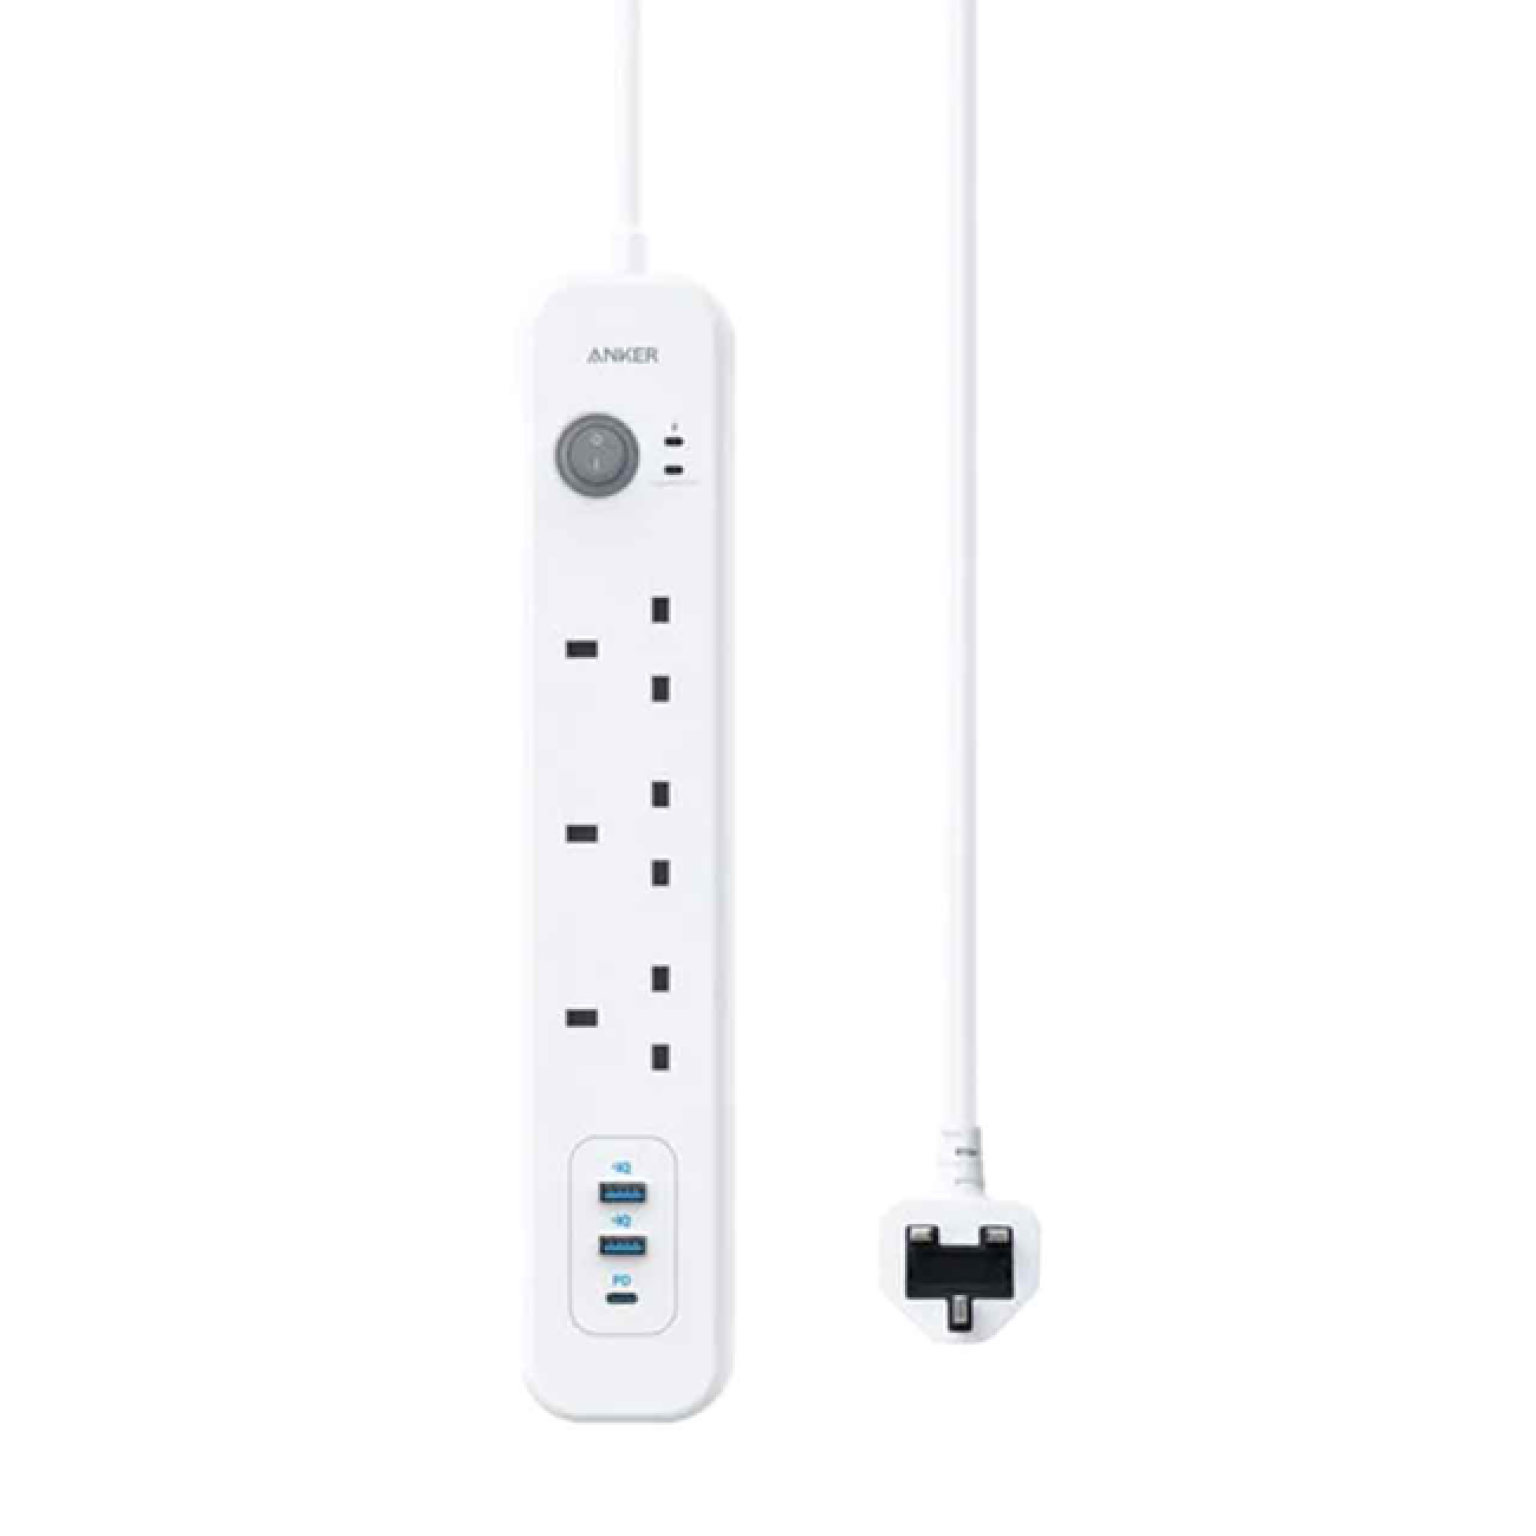 3 house analog ANKER power protector with 2 meters switch model A9136 white 1